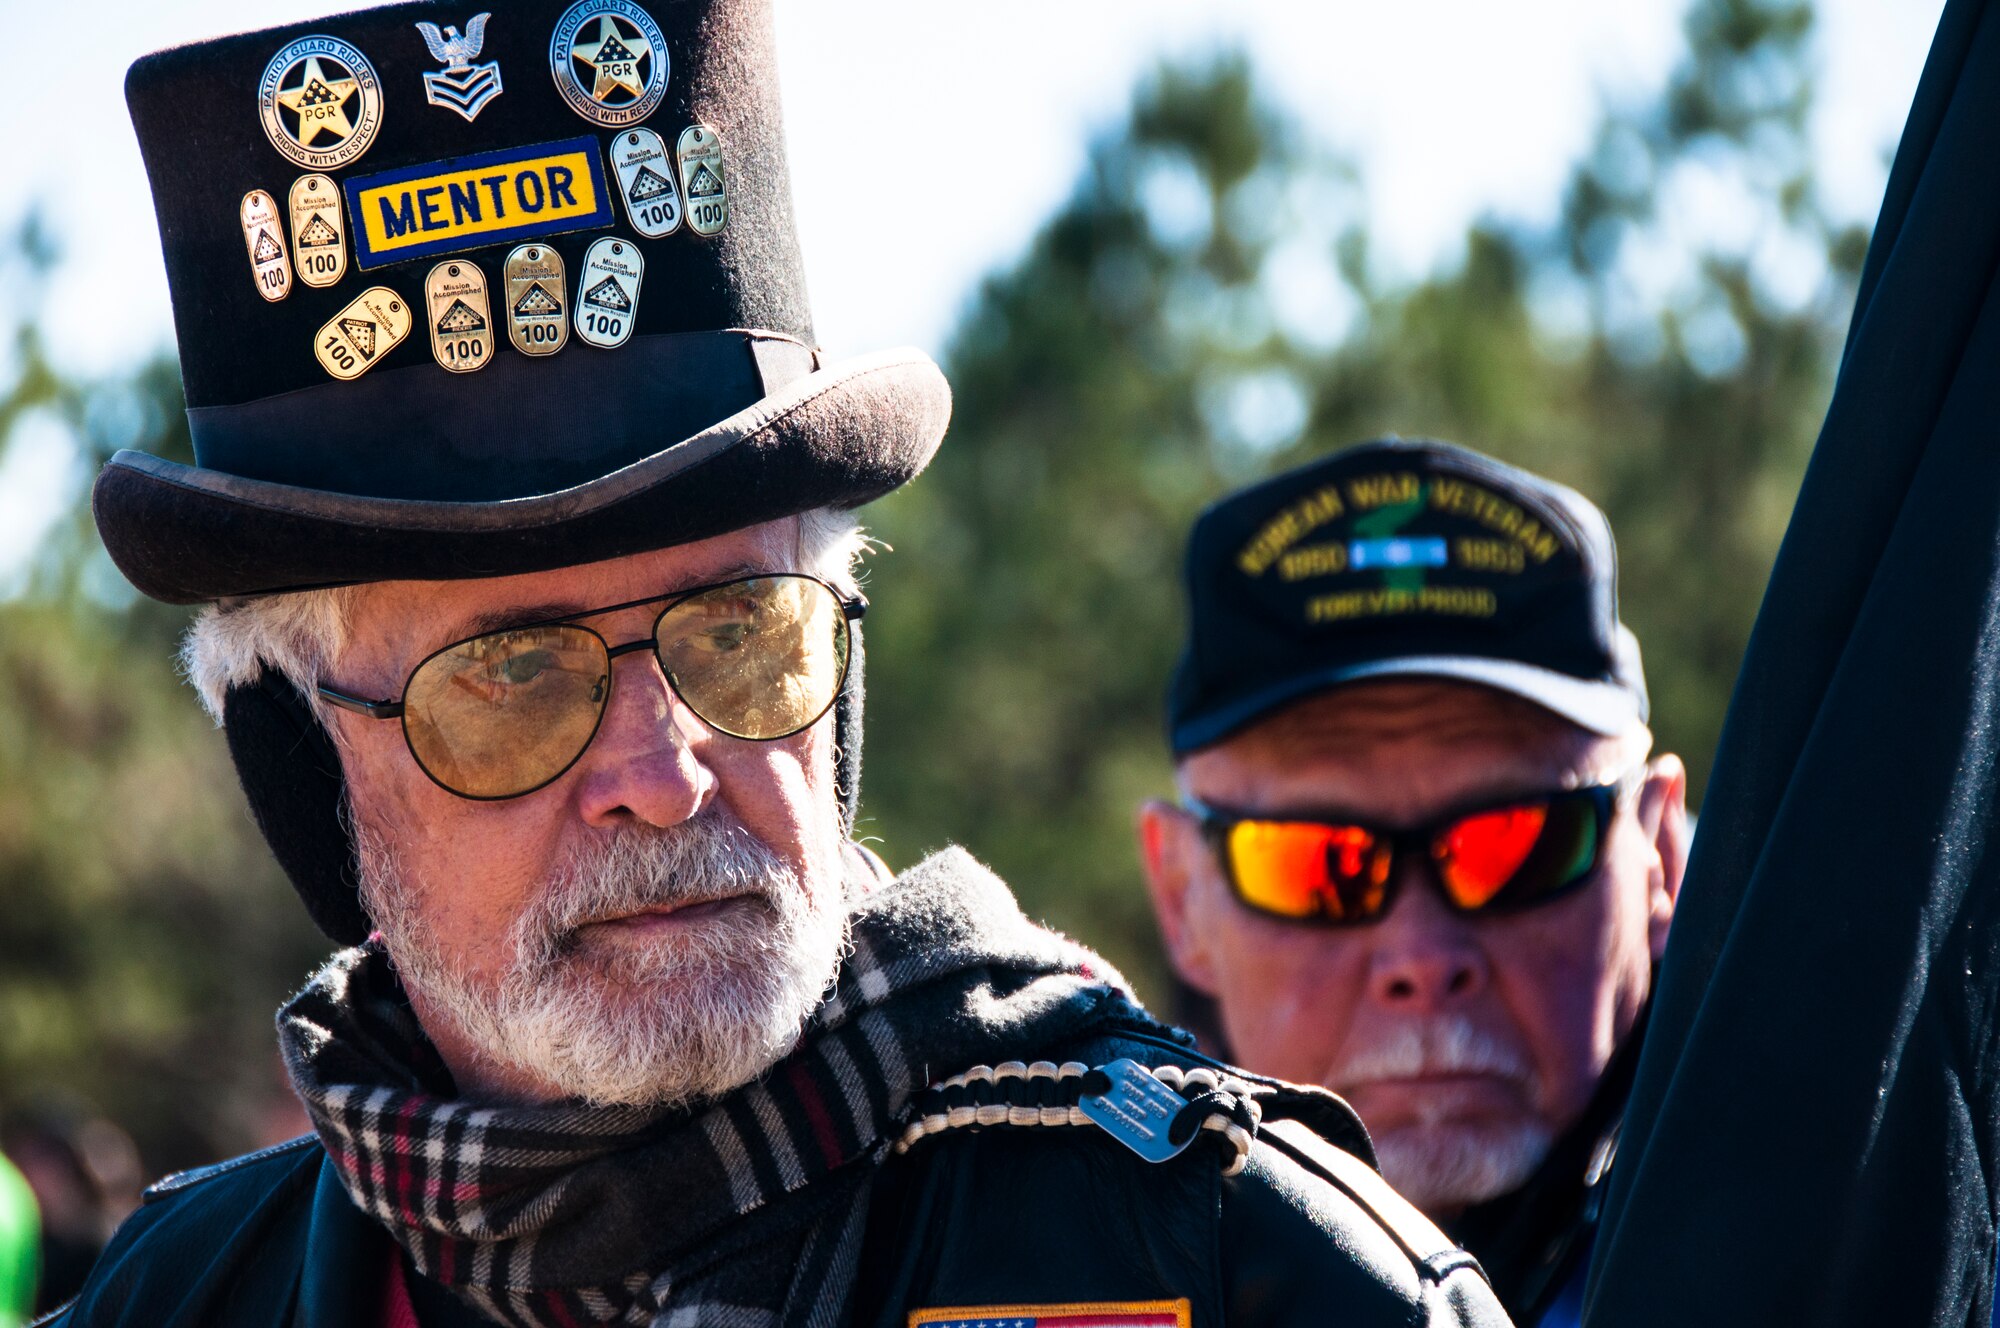 A member of the Patriot Guard Riders stands in formation for the Wreaths Across America ceremony at Georgia National Cemetery Dec. 13, 2014. The Patriot Guard Riders is an organization based in the United States whose members attend the funerals of members of the U.S. military, firefighters and police at the invitation of a decedent's family. (U.S. Air Force photo/Senior Airman Daniel Phelps)